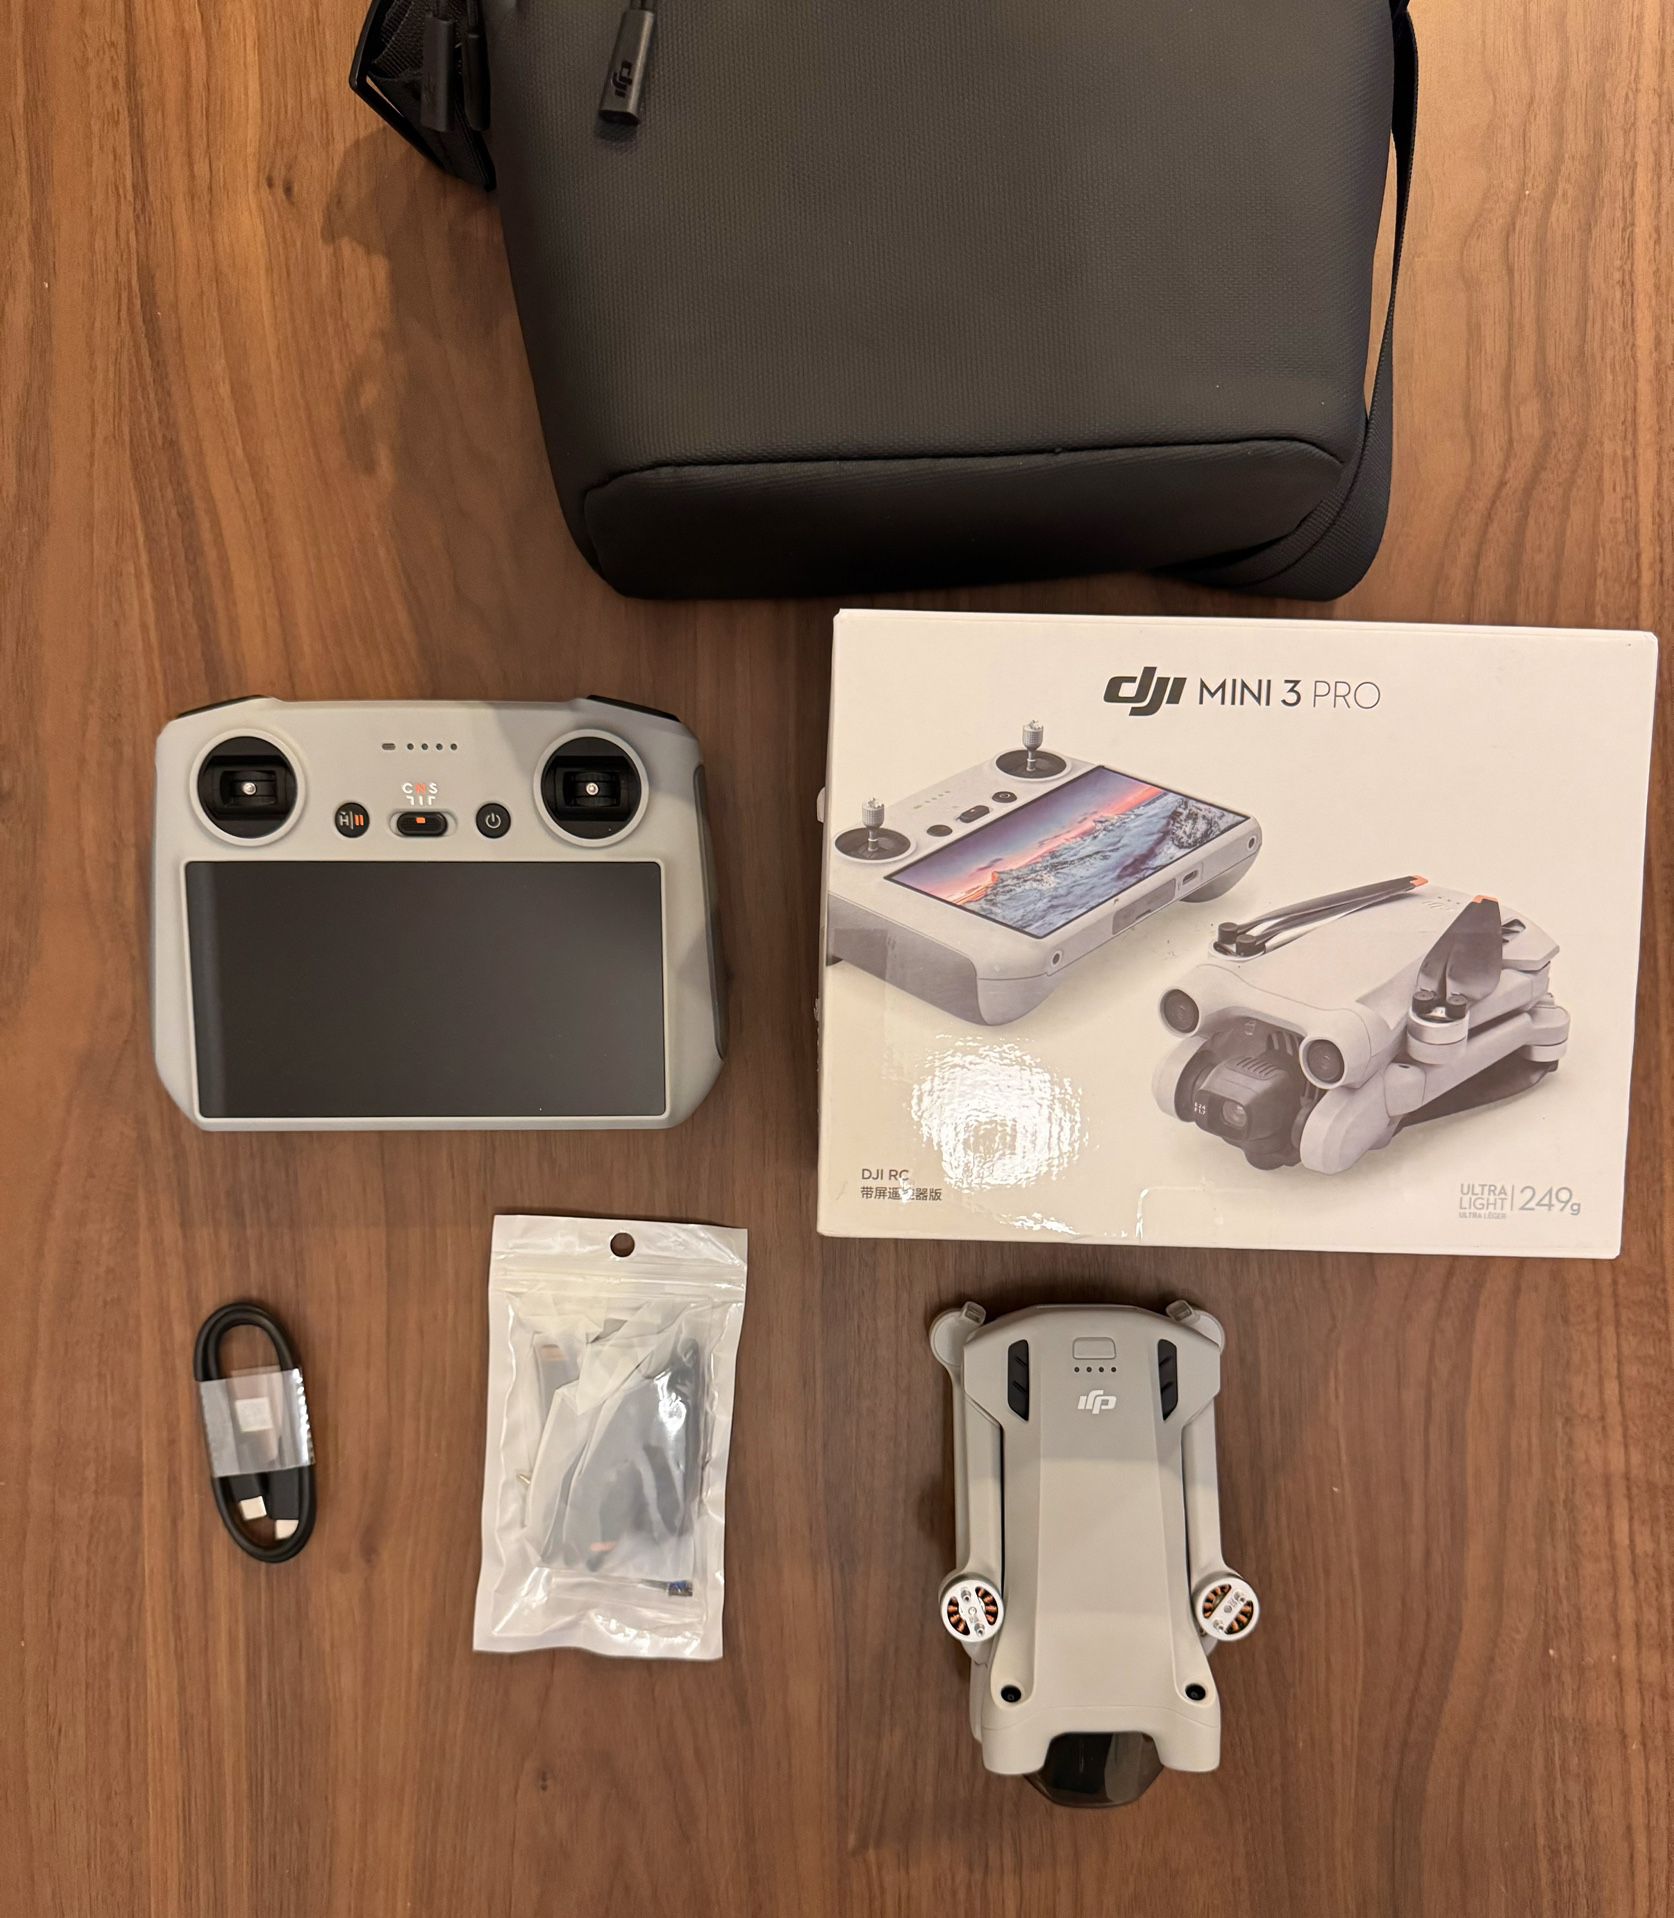 DJI - Mini 3 Pro Drone and RC Remote Control with Built-in Screen